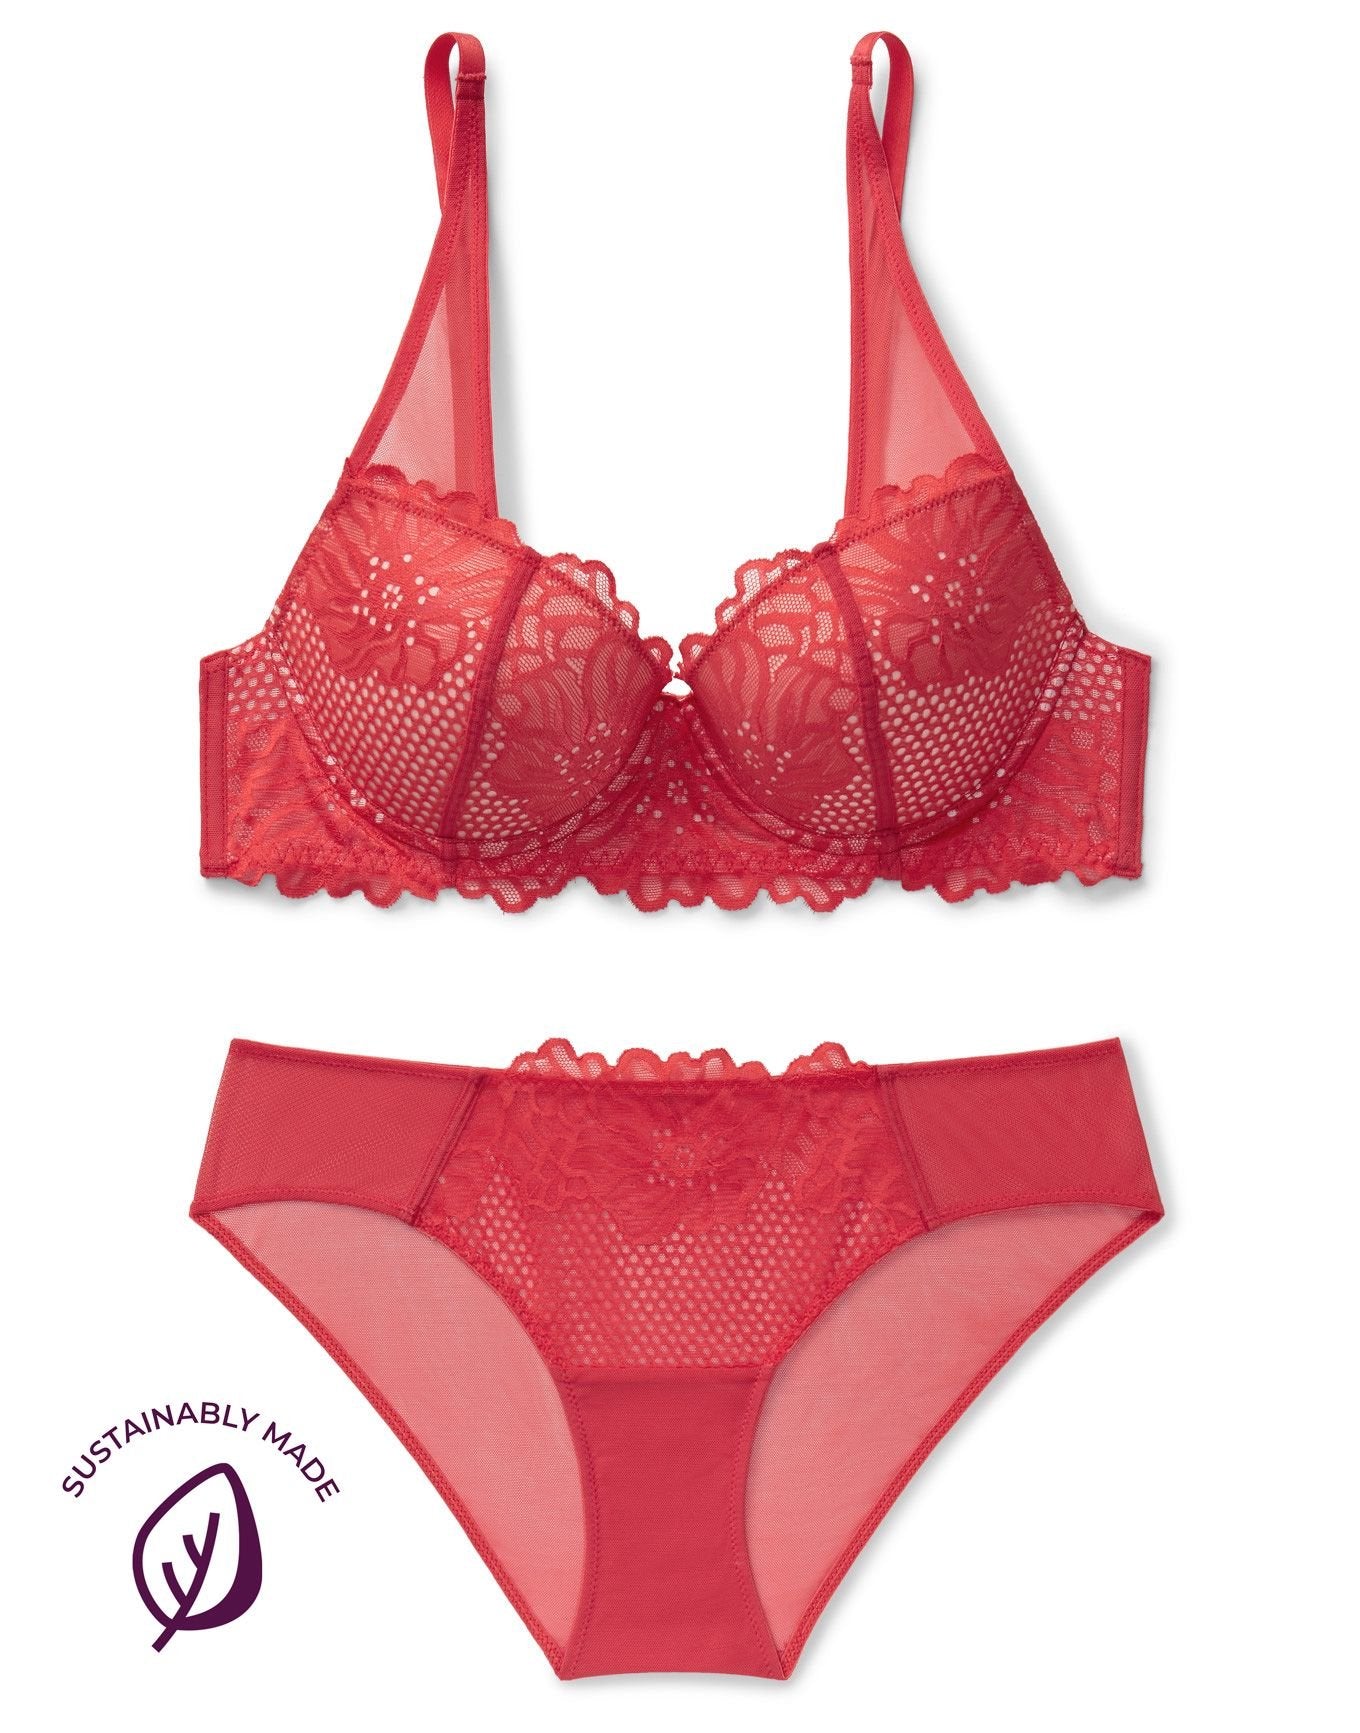 Adore Me Magdalena Push-Up Demi in color Cayenne and shape demi